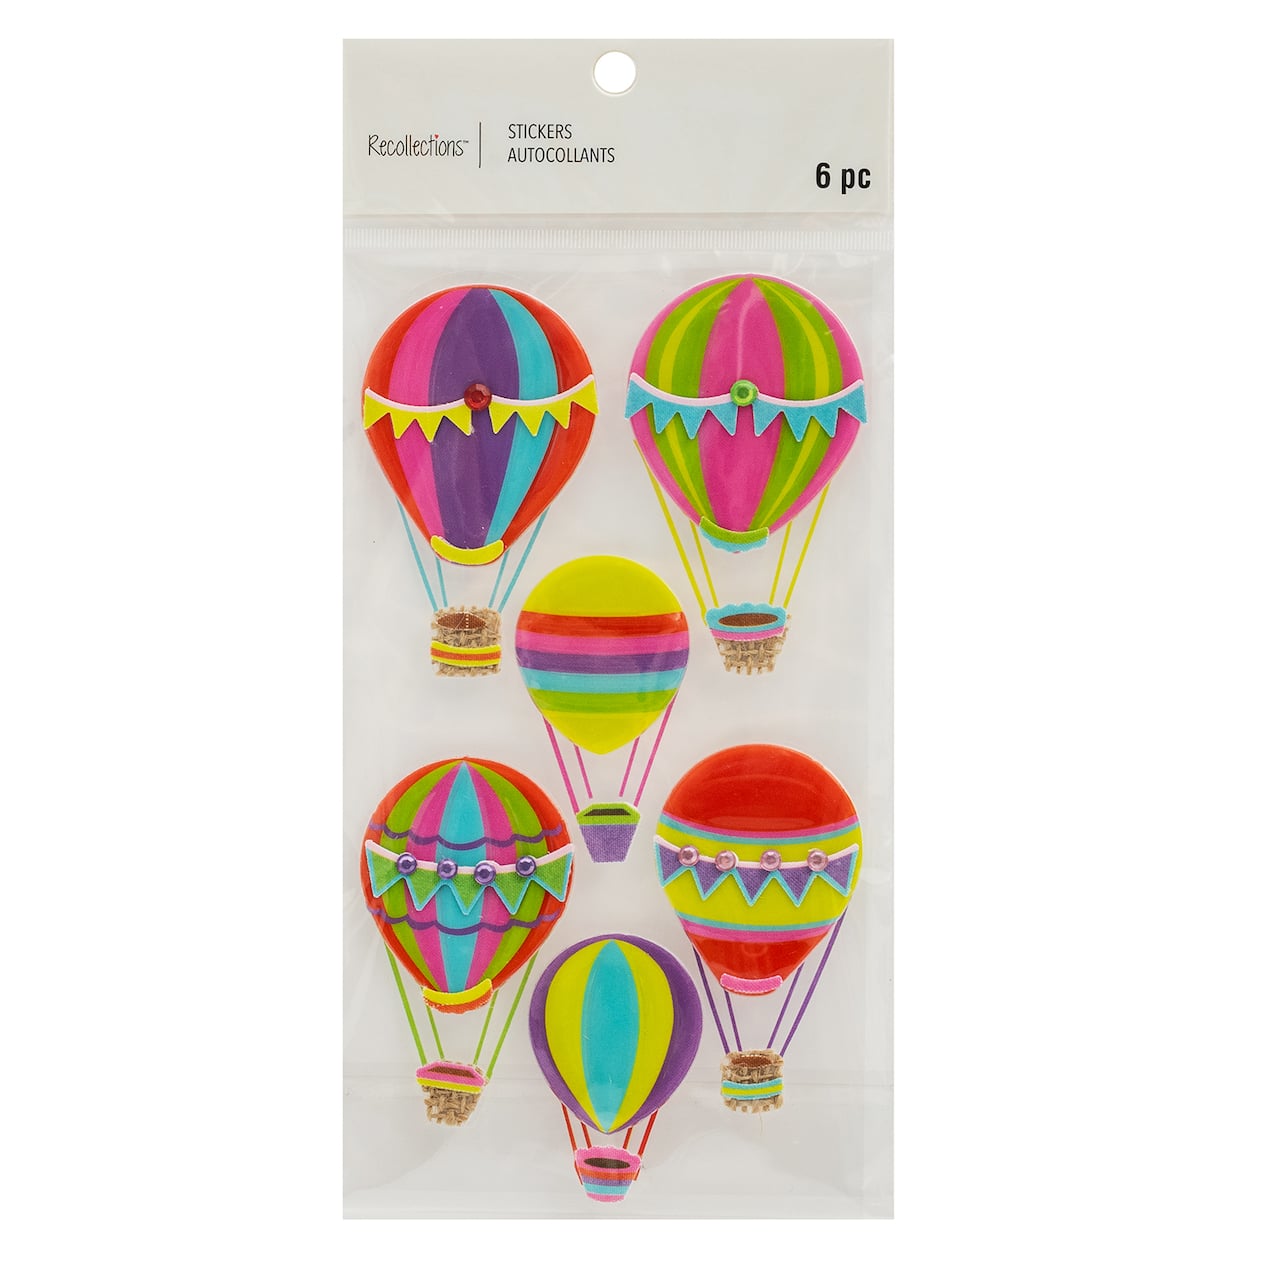 12 Packs: 6 ct. (72 total) Hot Air Balloon Stickers by Recollections™